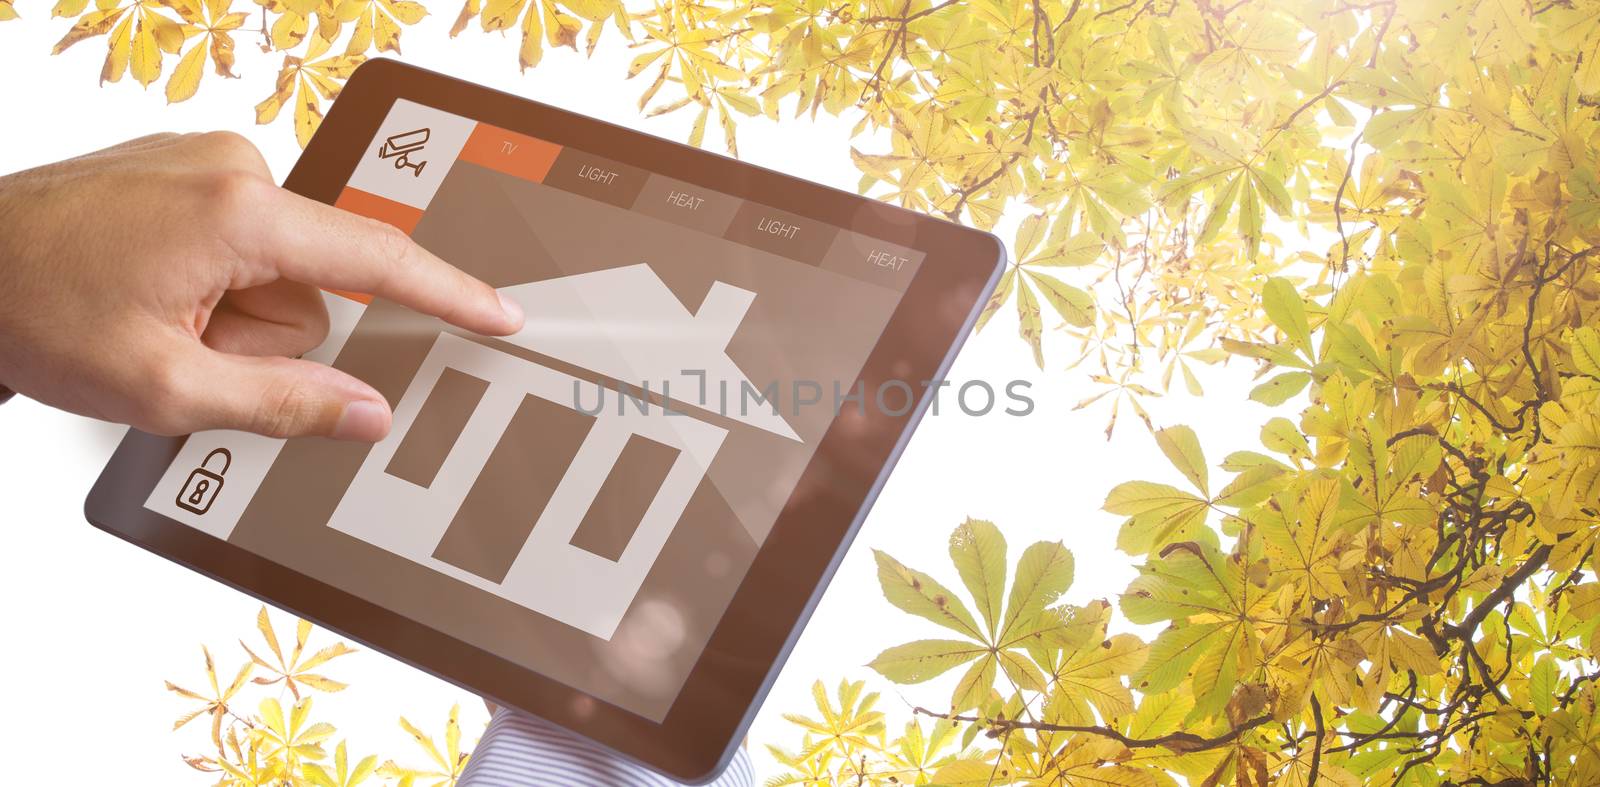 Man using tablet pc  against autumnal leaves against the clear sky